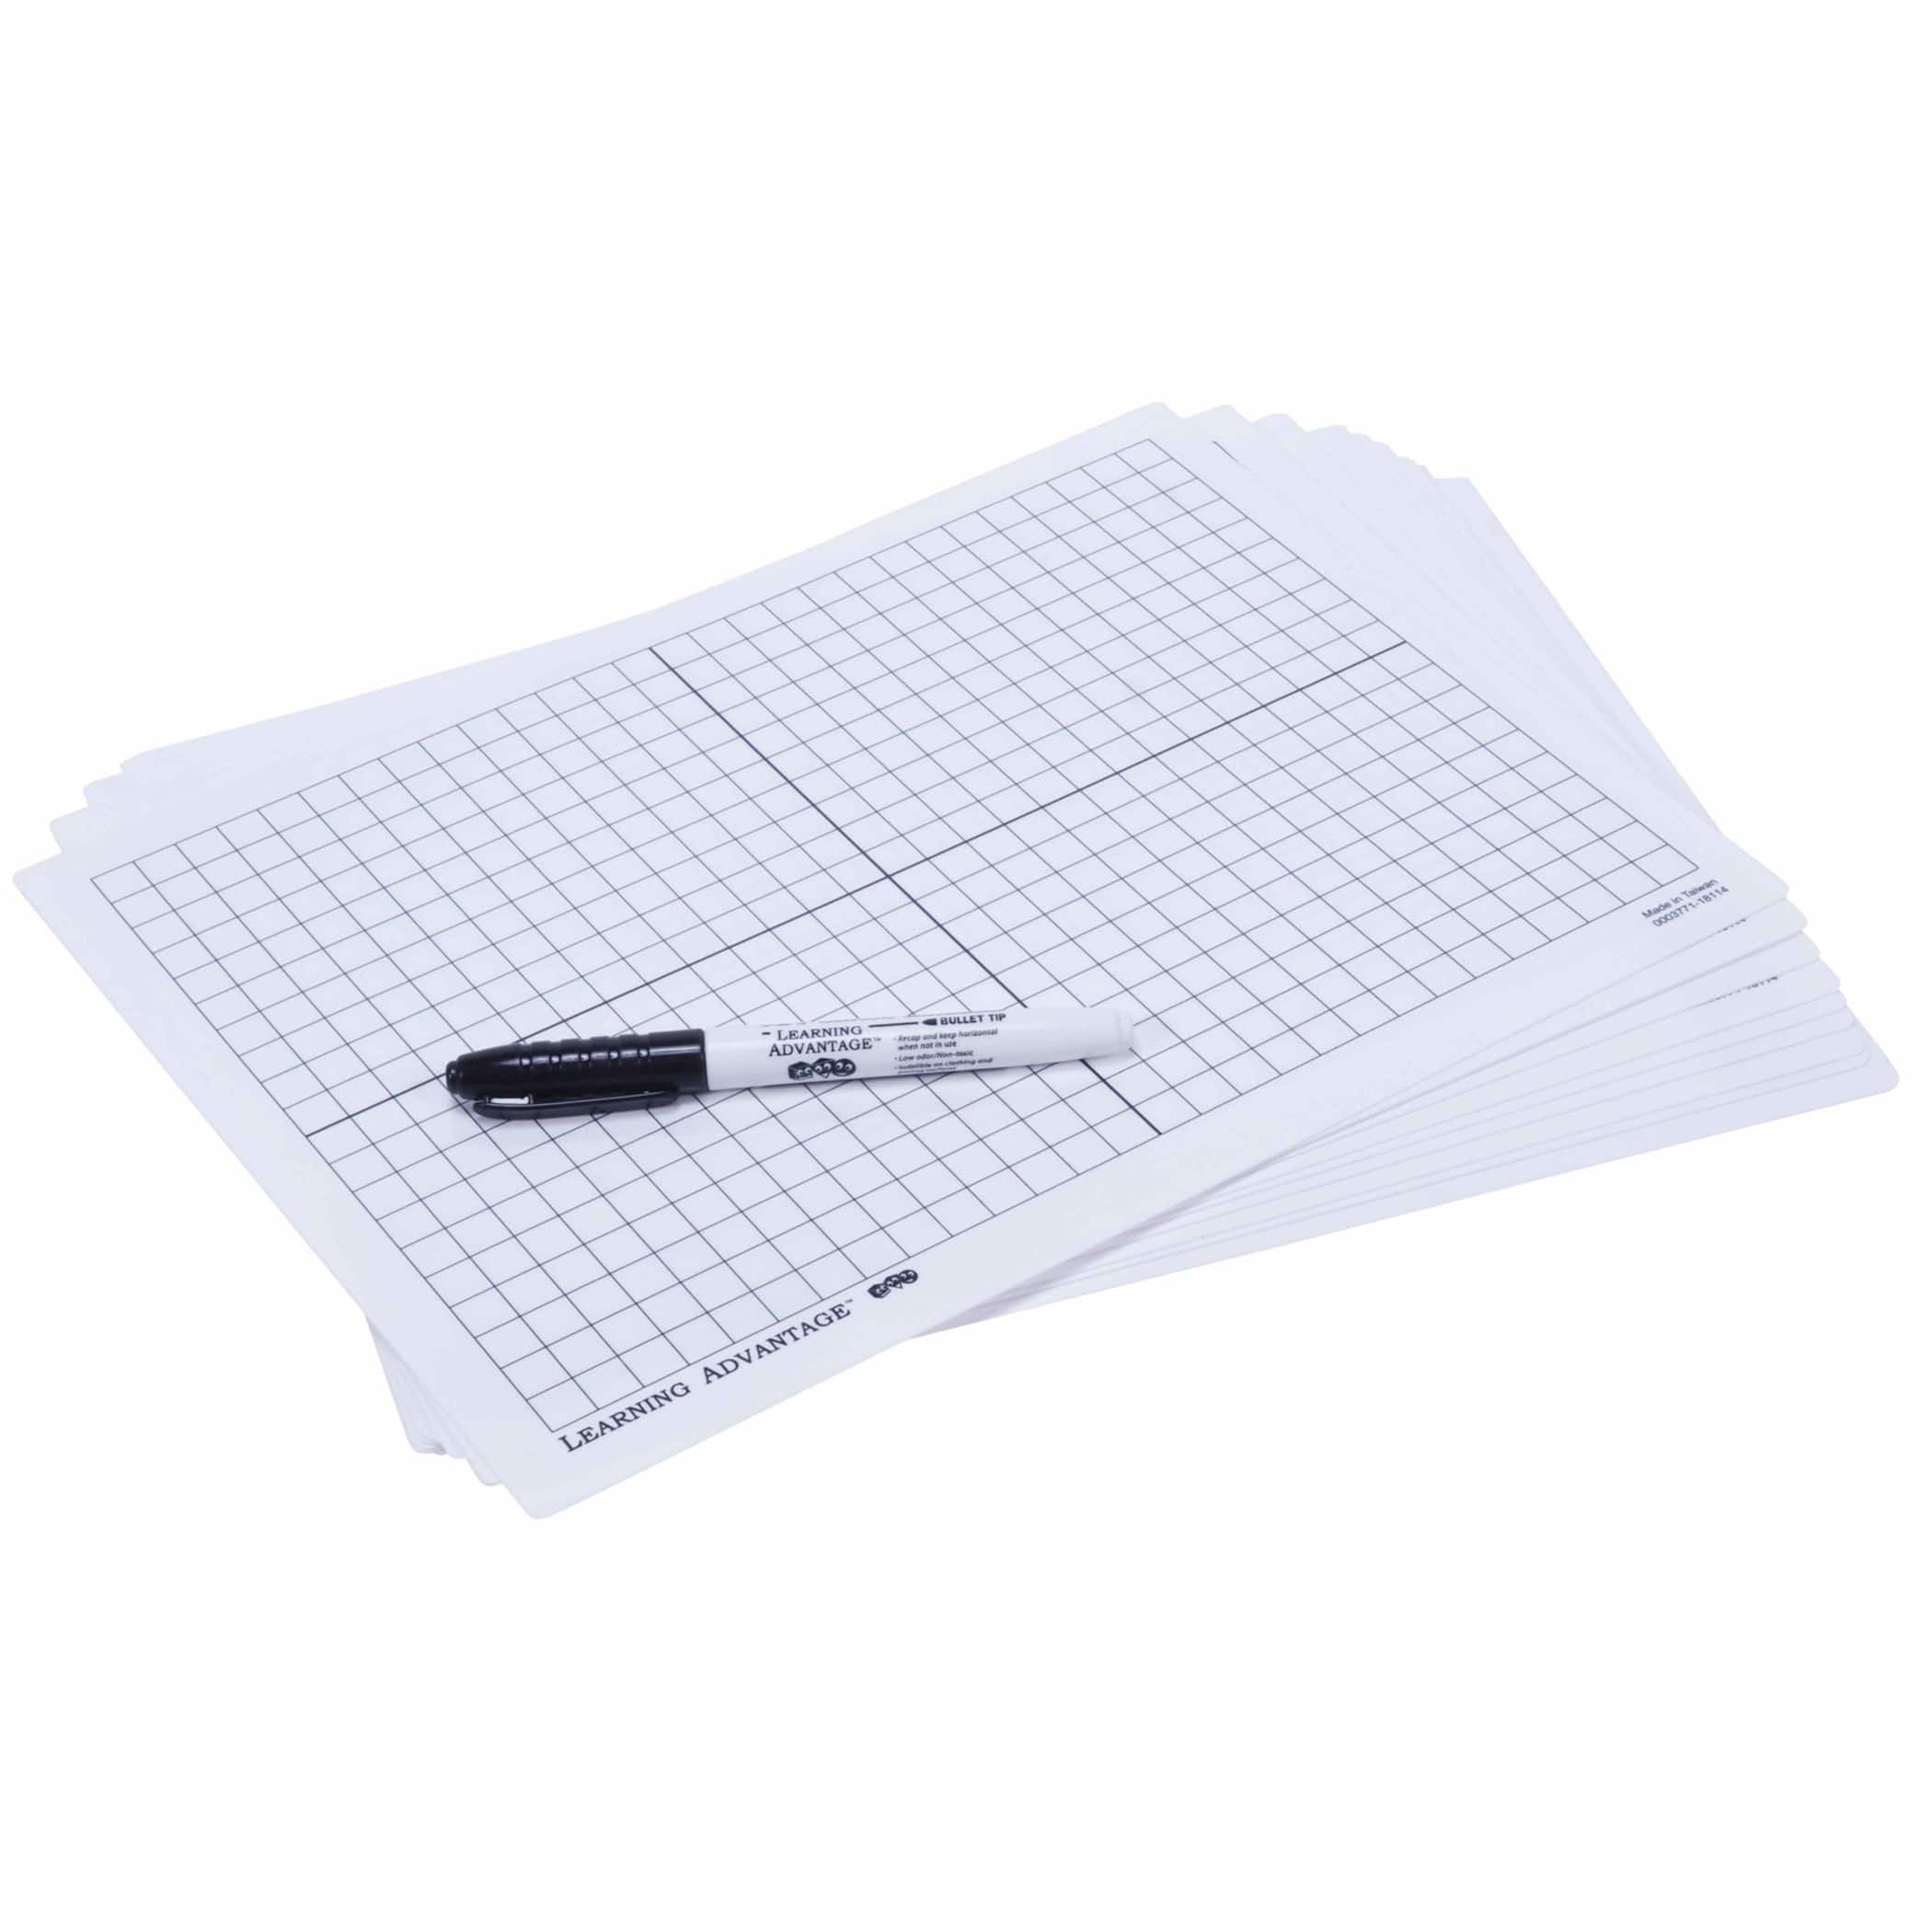 XY Axis Dry Erase Boards, Set of 10